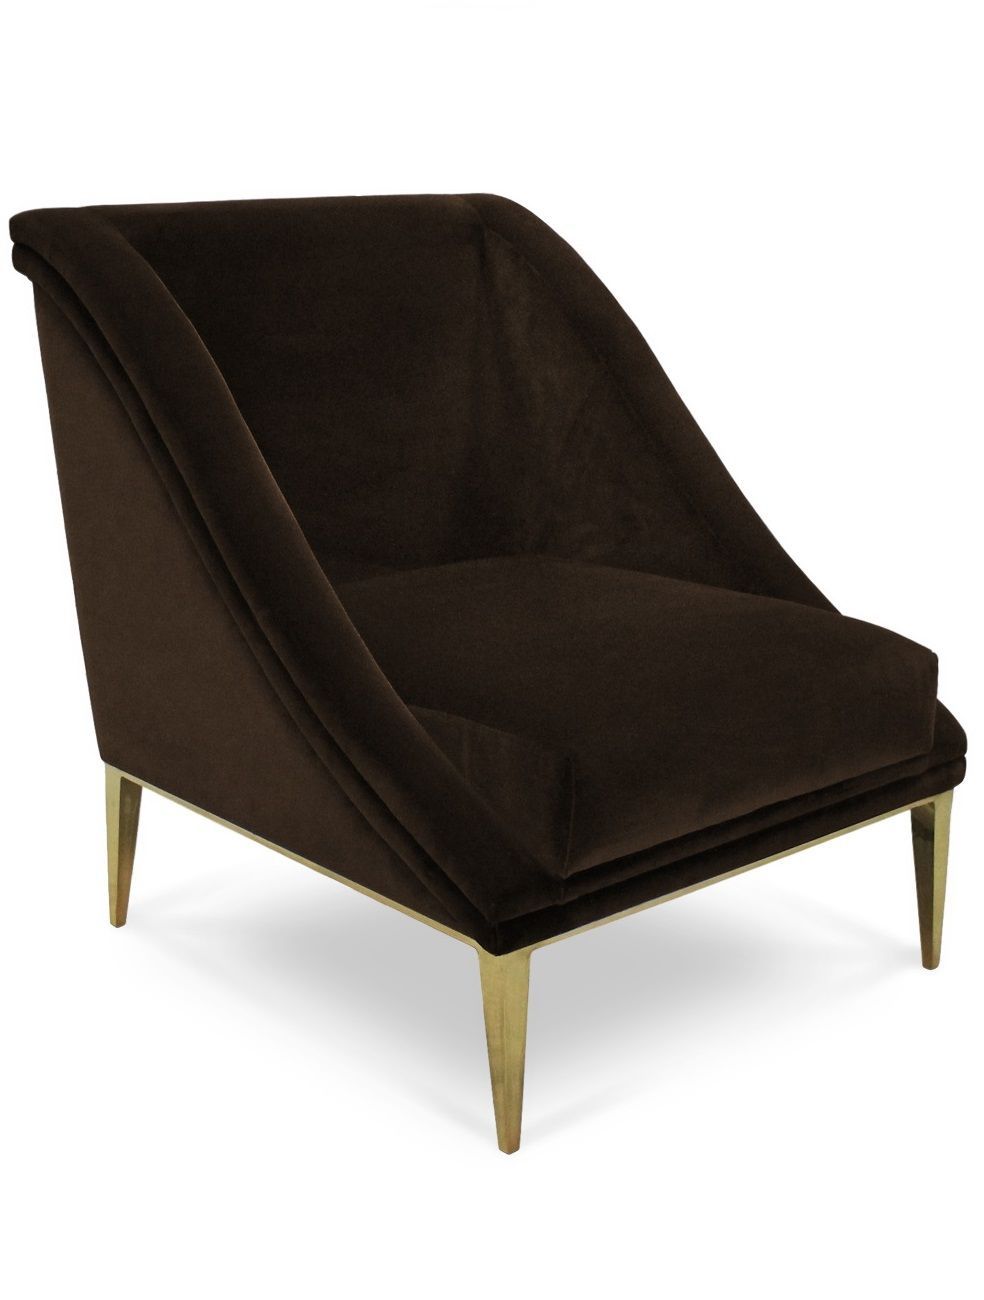 Armchairs" Arm Chair, Arm Chairs, Luxury Armchair, Luxury Armchairs Regarding Tate Arm Sofa Chairs (View 3 of 25)